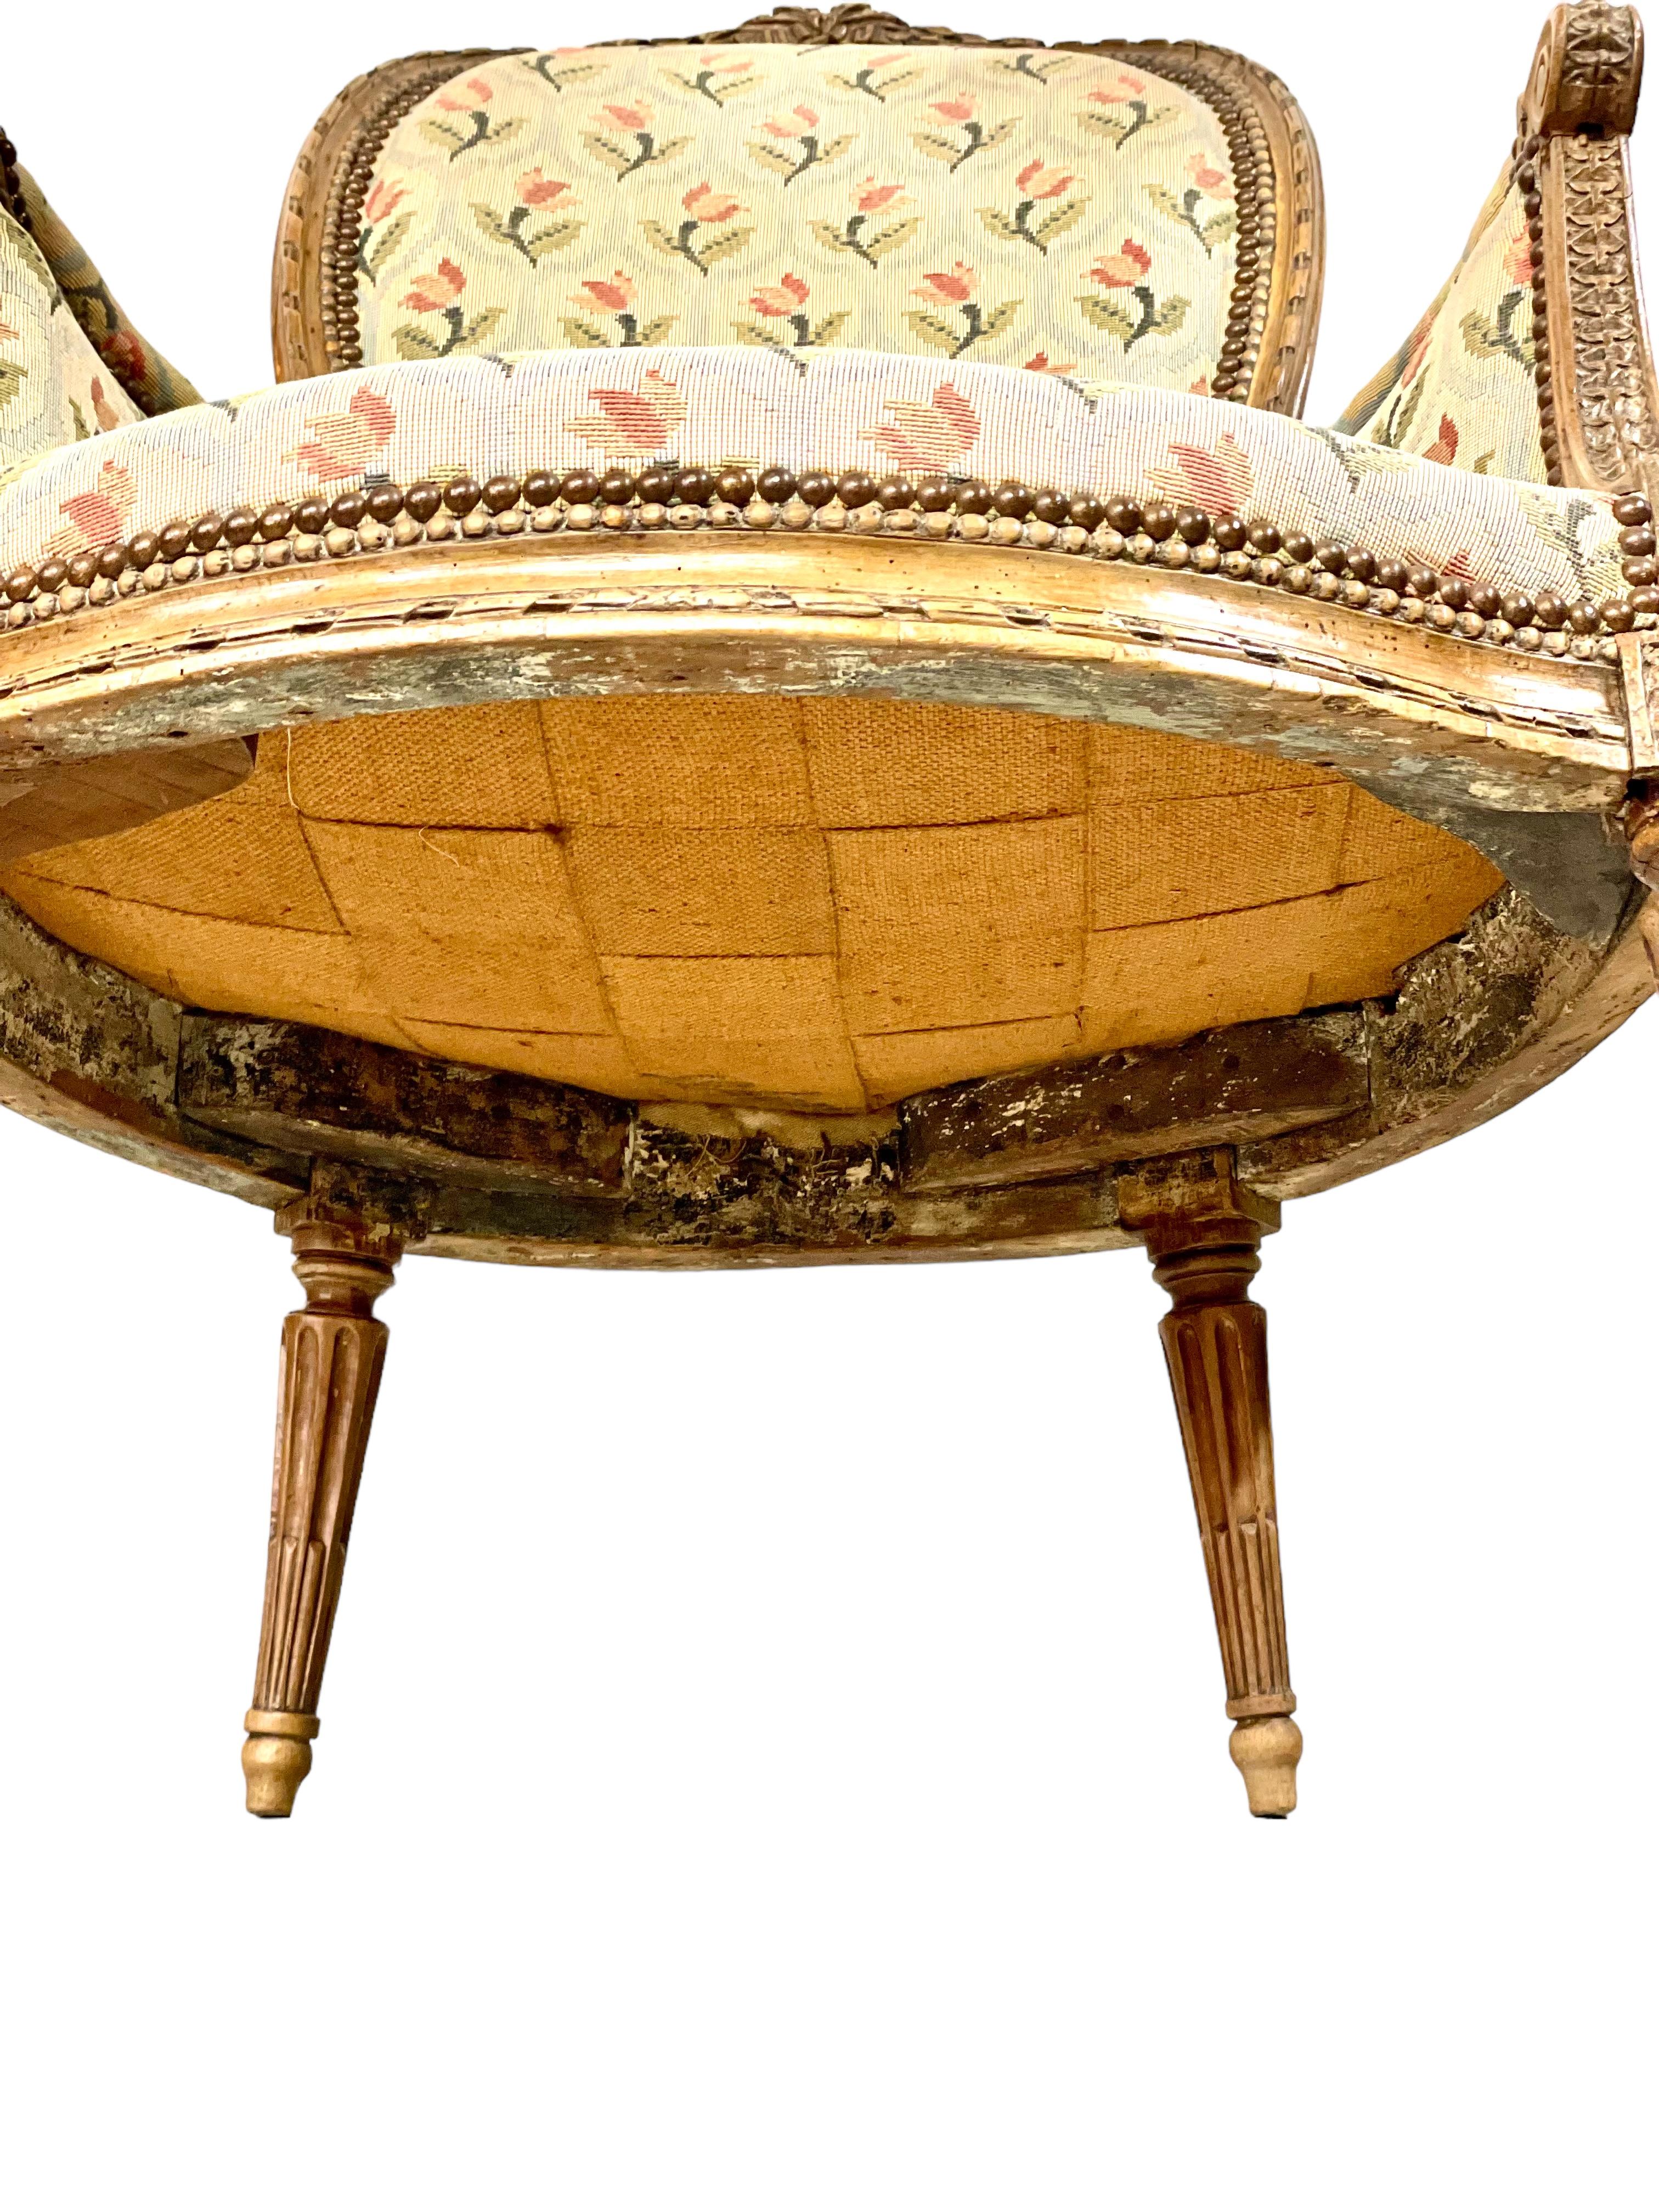 Louis XVI Period Bergere Chair 18th Century  For Sale 9